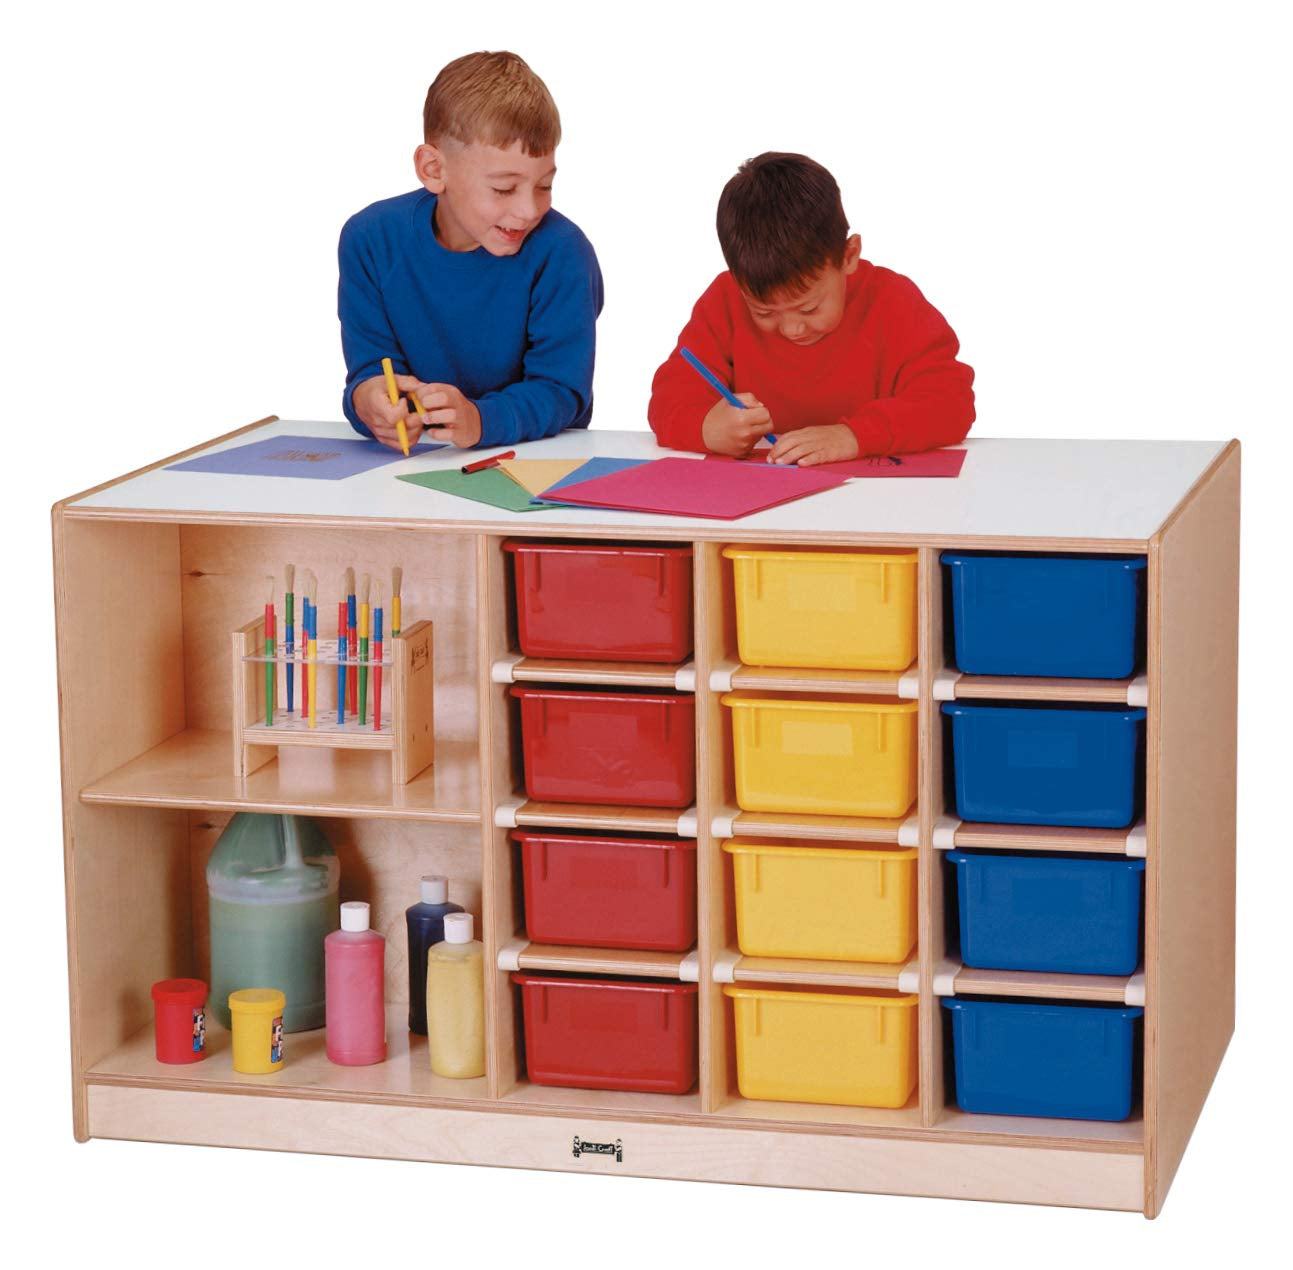 0440JC Mobile Storage Island with Assorted Colored Bins